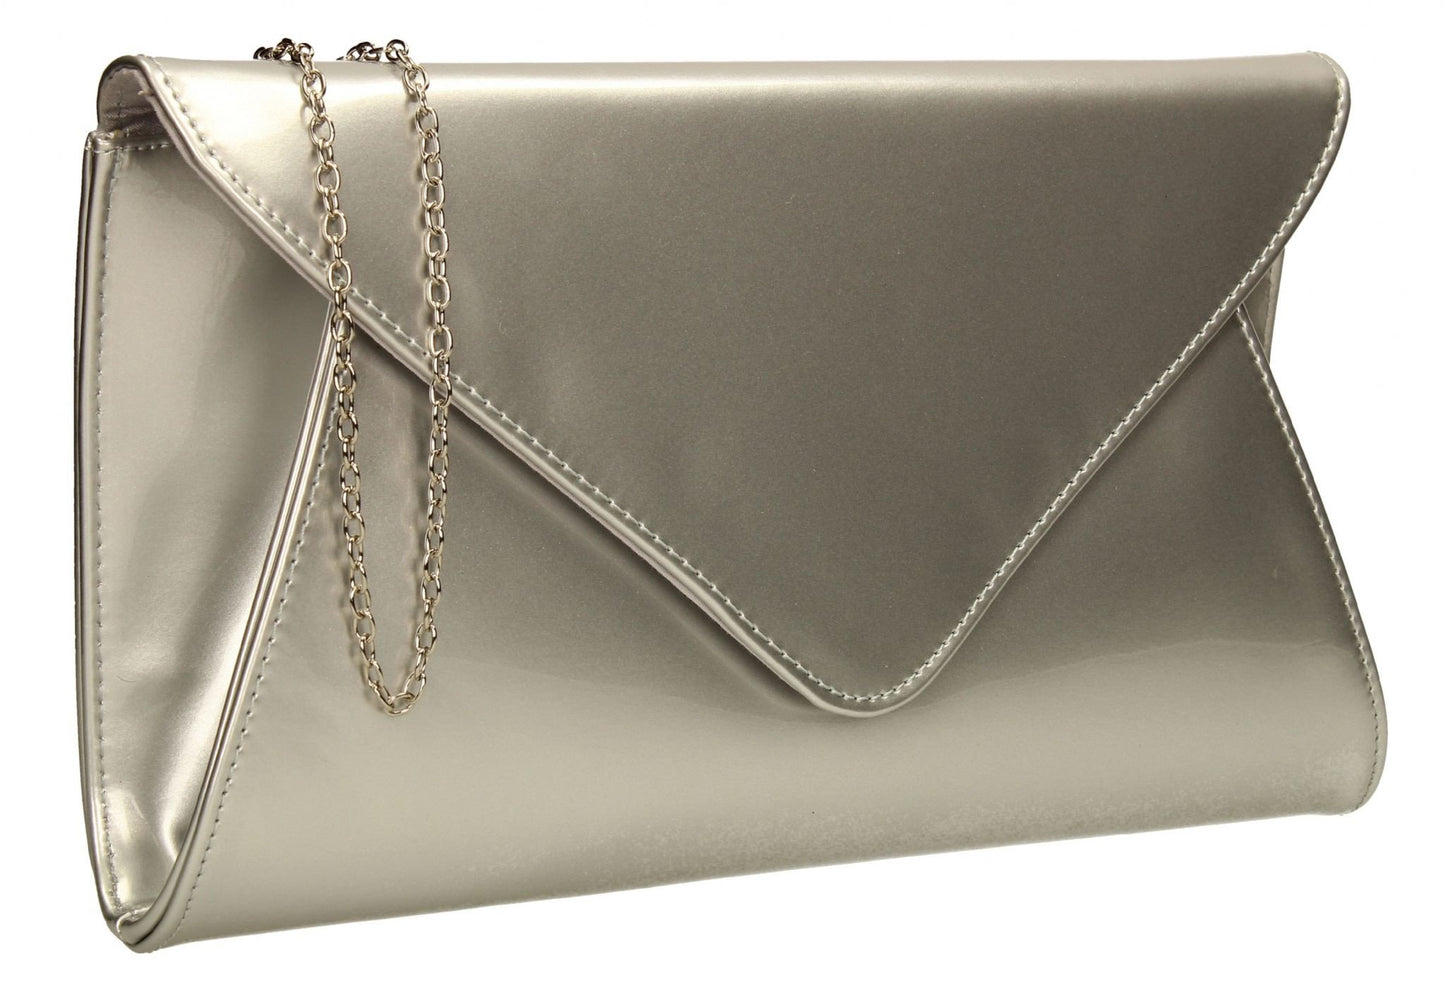 SWANKYSWANS Juliet Patent Envelope Clutch Bag Silver Cute Cheap Clutch Bag For Weddings School and Work